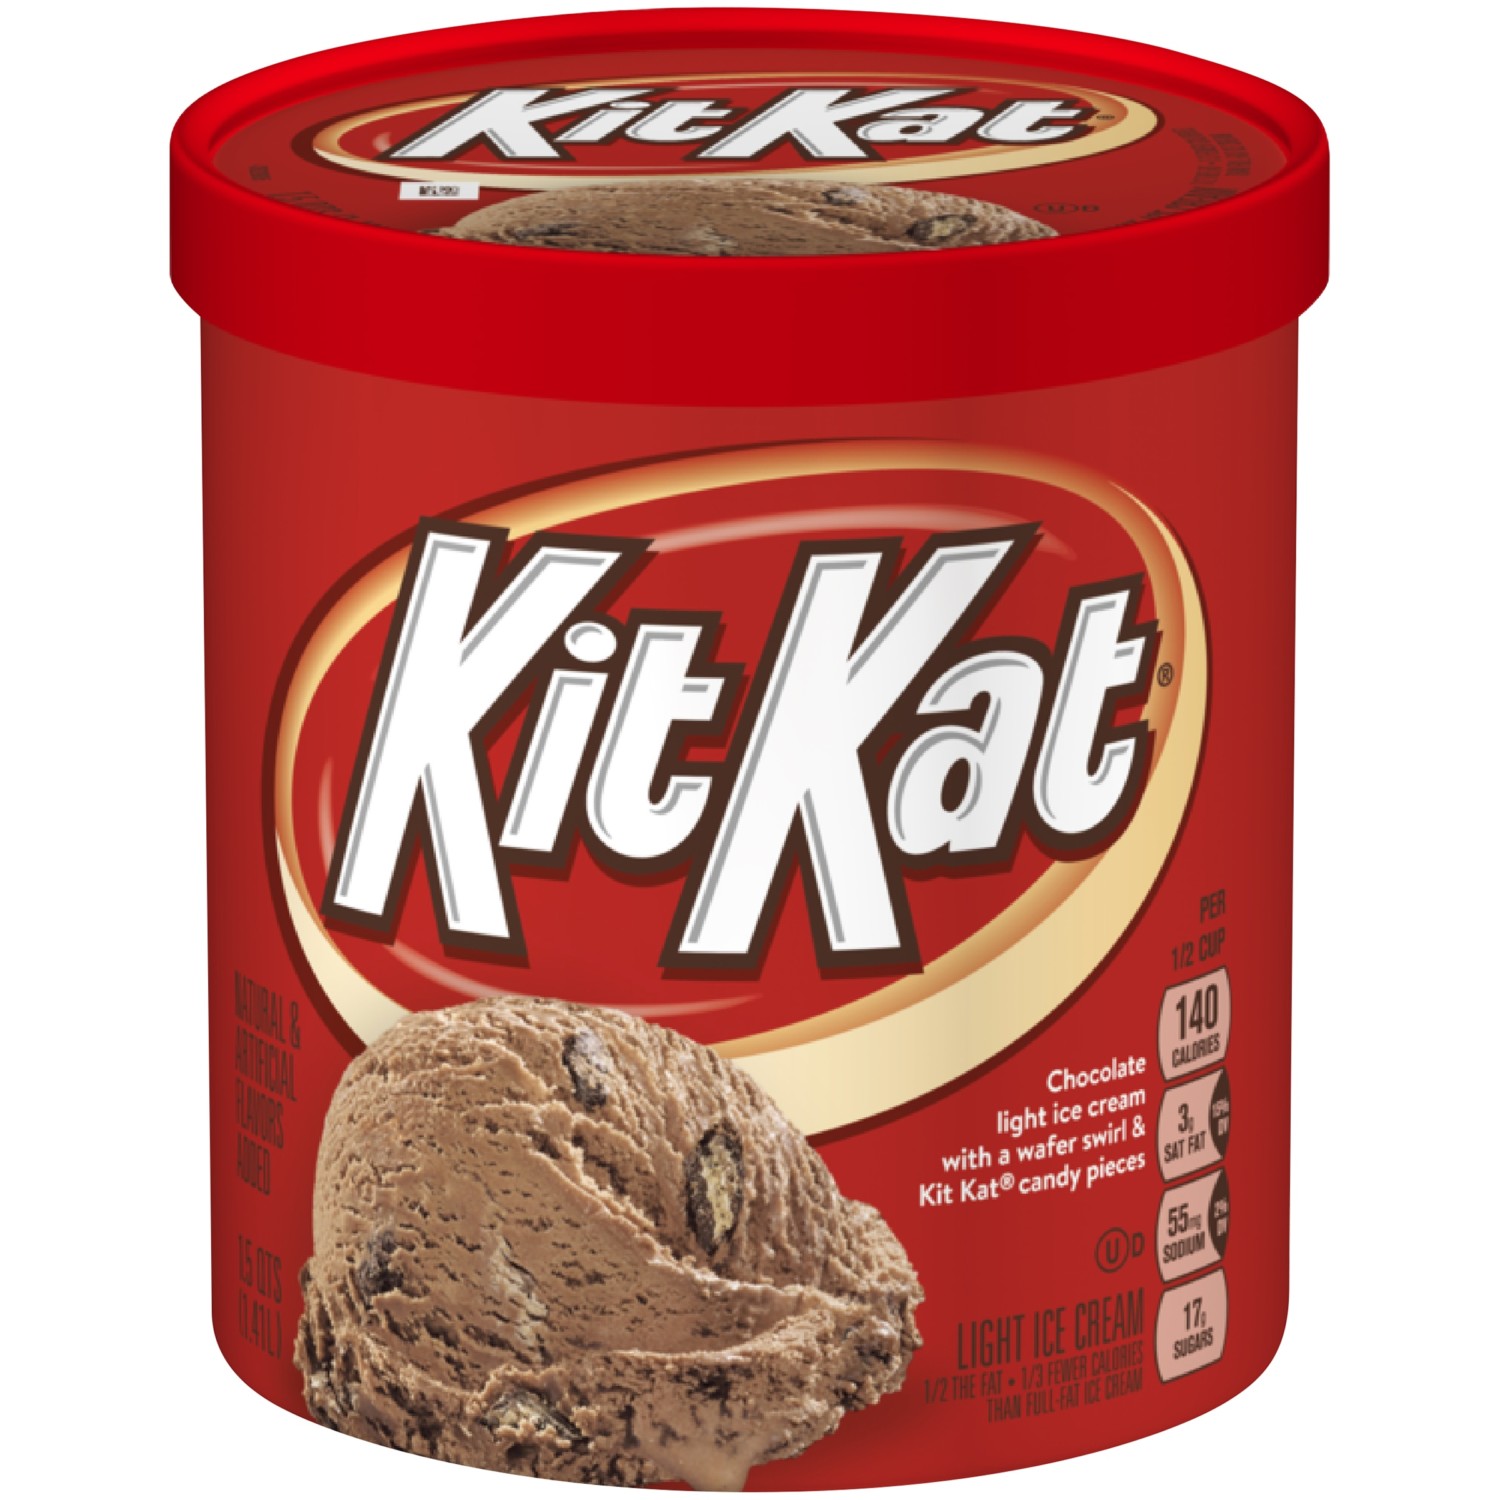 You Can Now Buy Kit Kat Ice Cream At Walmart